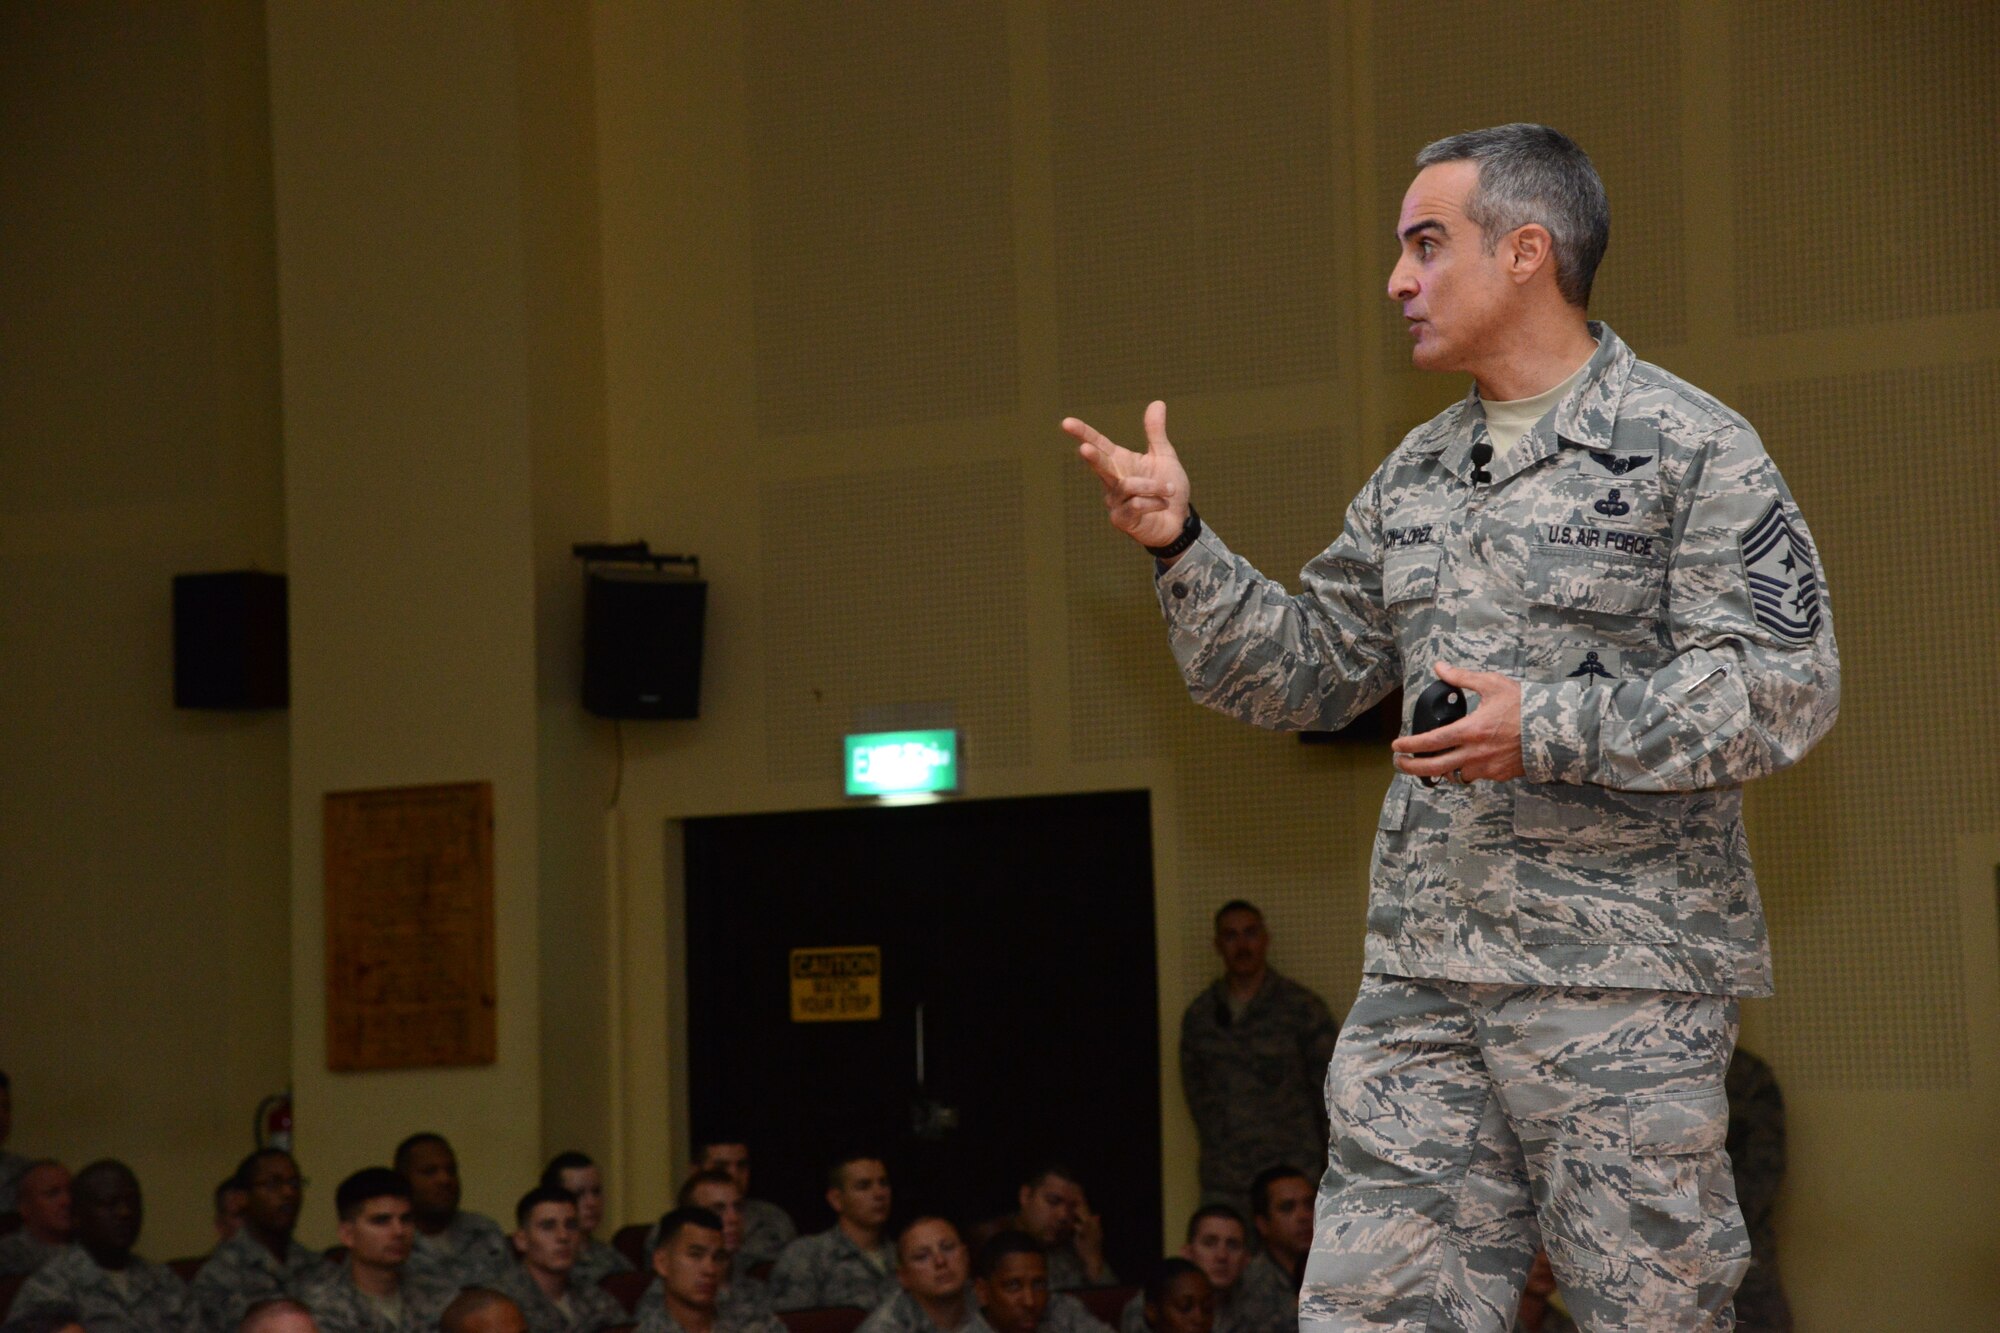 Chief Master Sgt. Ramon Colon-Lopez, U.S. Air Forces Central Command command chief, talks to Airmen from the 386th Air Expeditionary Wing during an enlisted all call Dec. 29, 2014. Colon-Lopez talked about the new evaluation system and the importance of rating everyone accurately. (U.S. Air Force photo by Tech. Sgt. Jared Marquis/released)